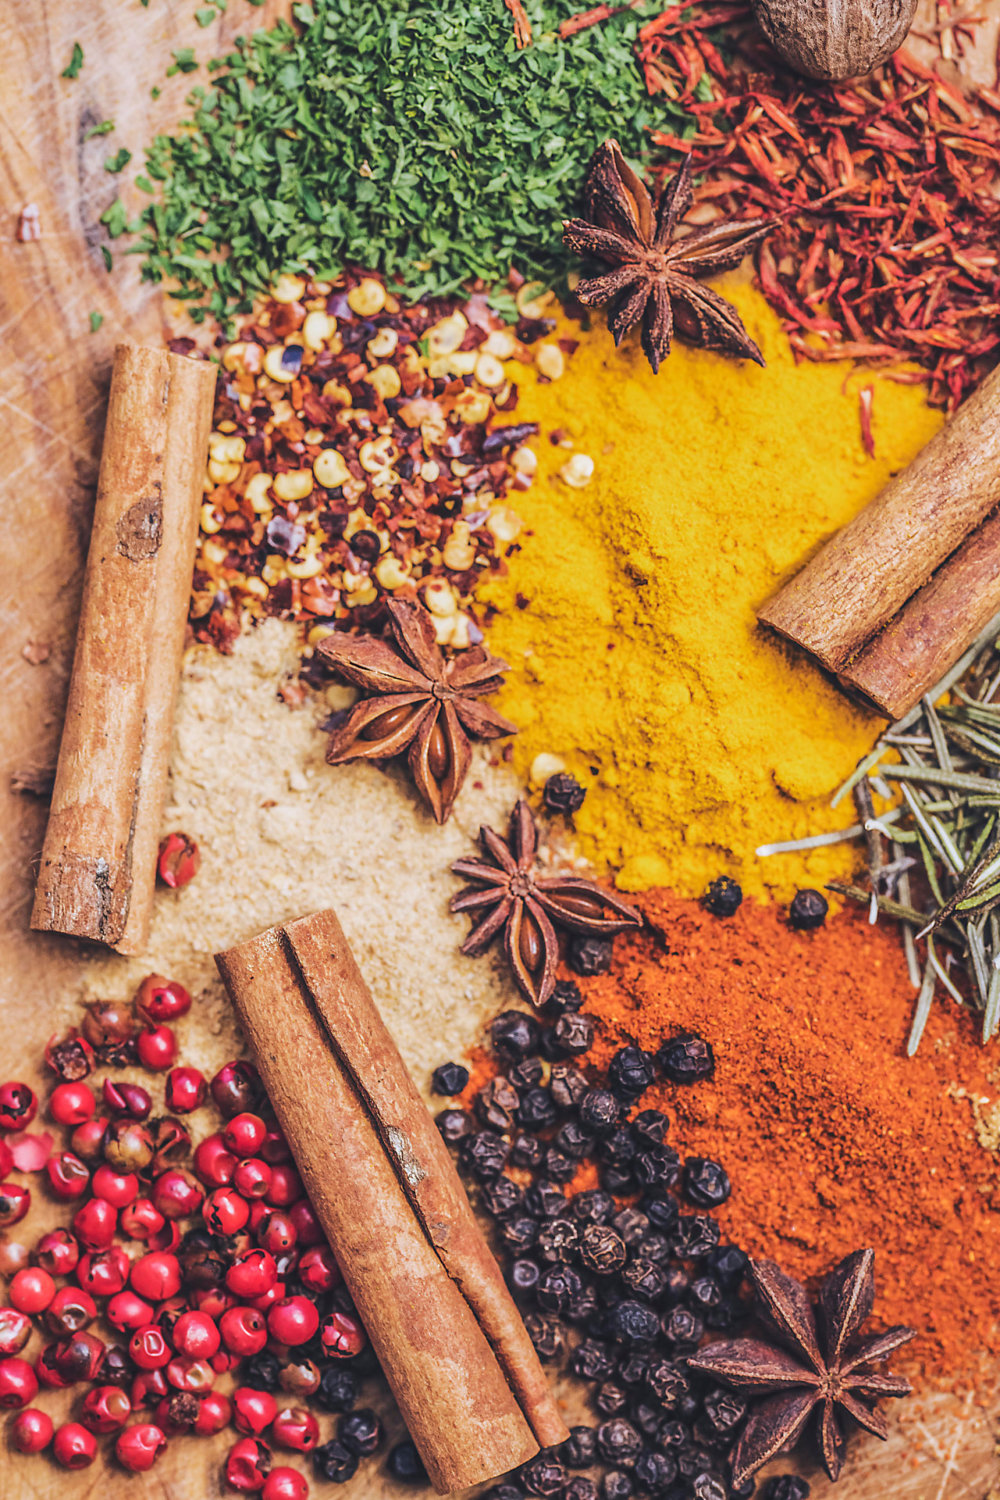 Why Preppers Should Stock Herbs and Spices